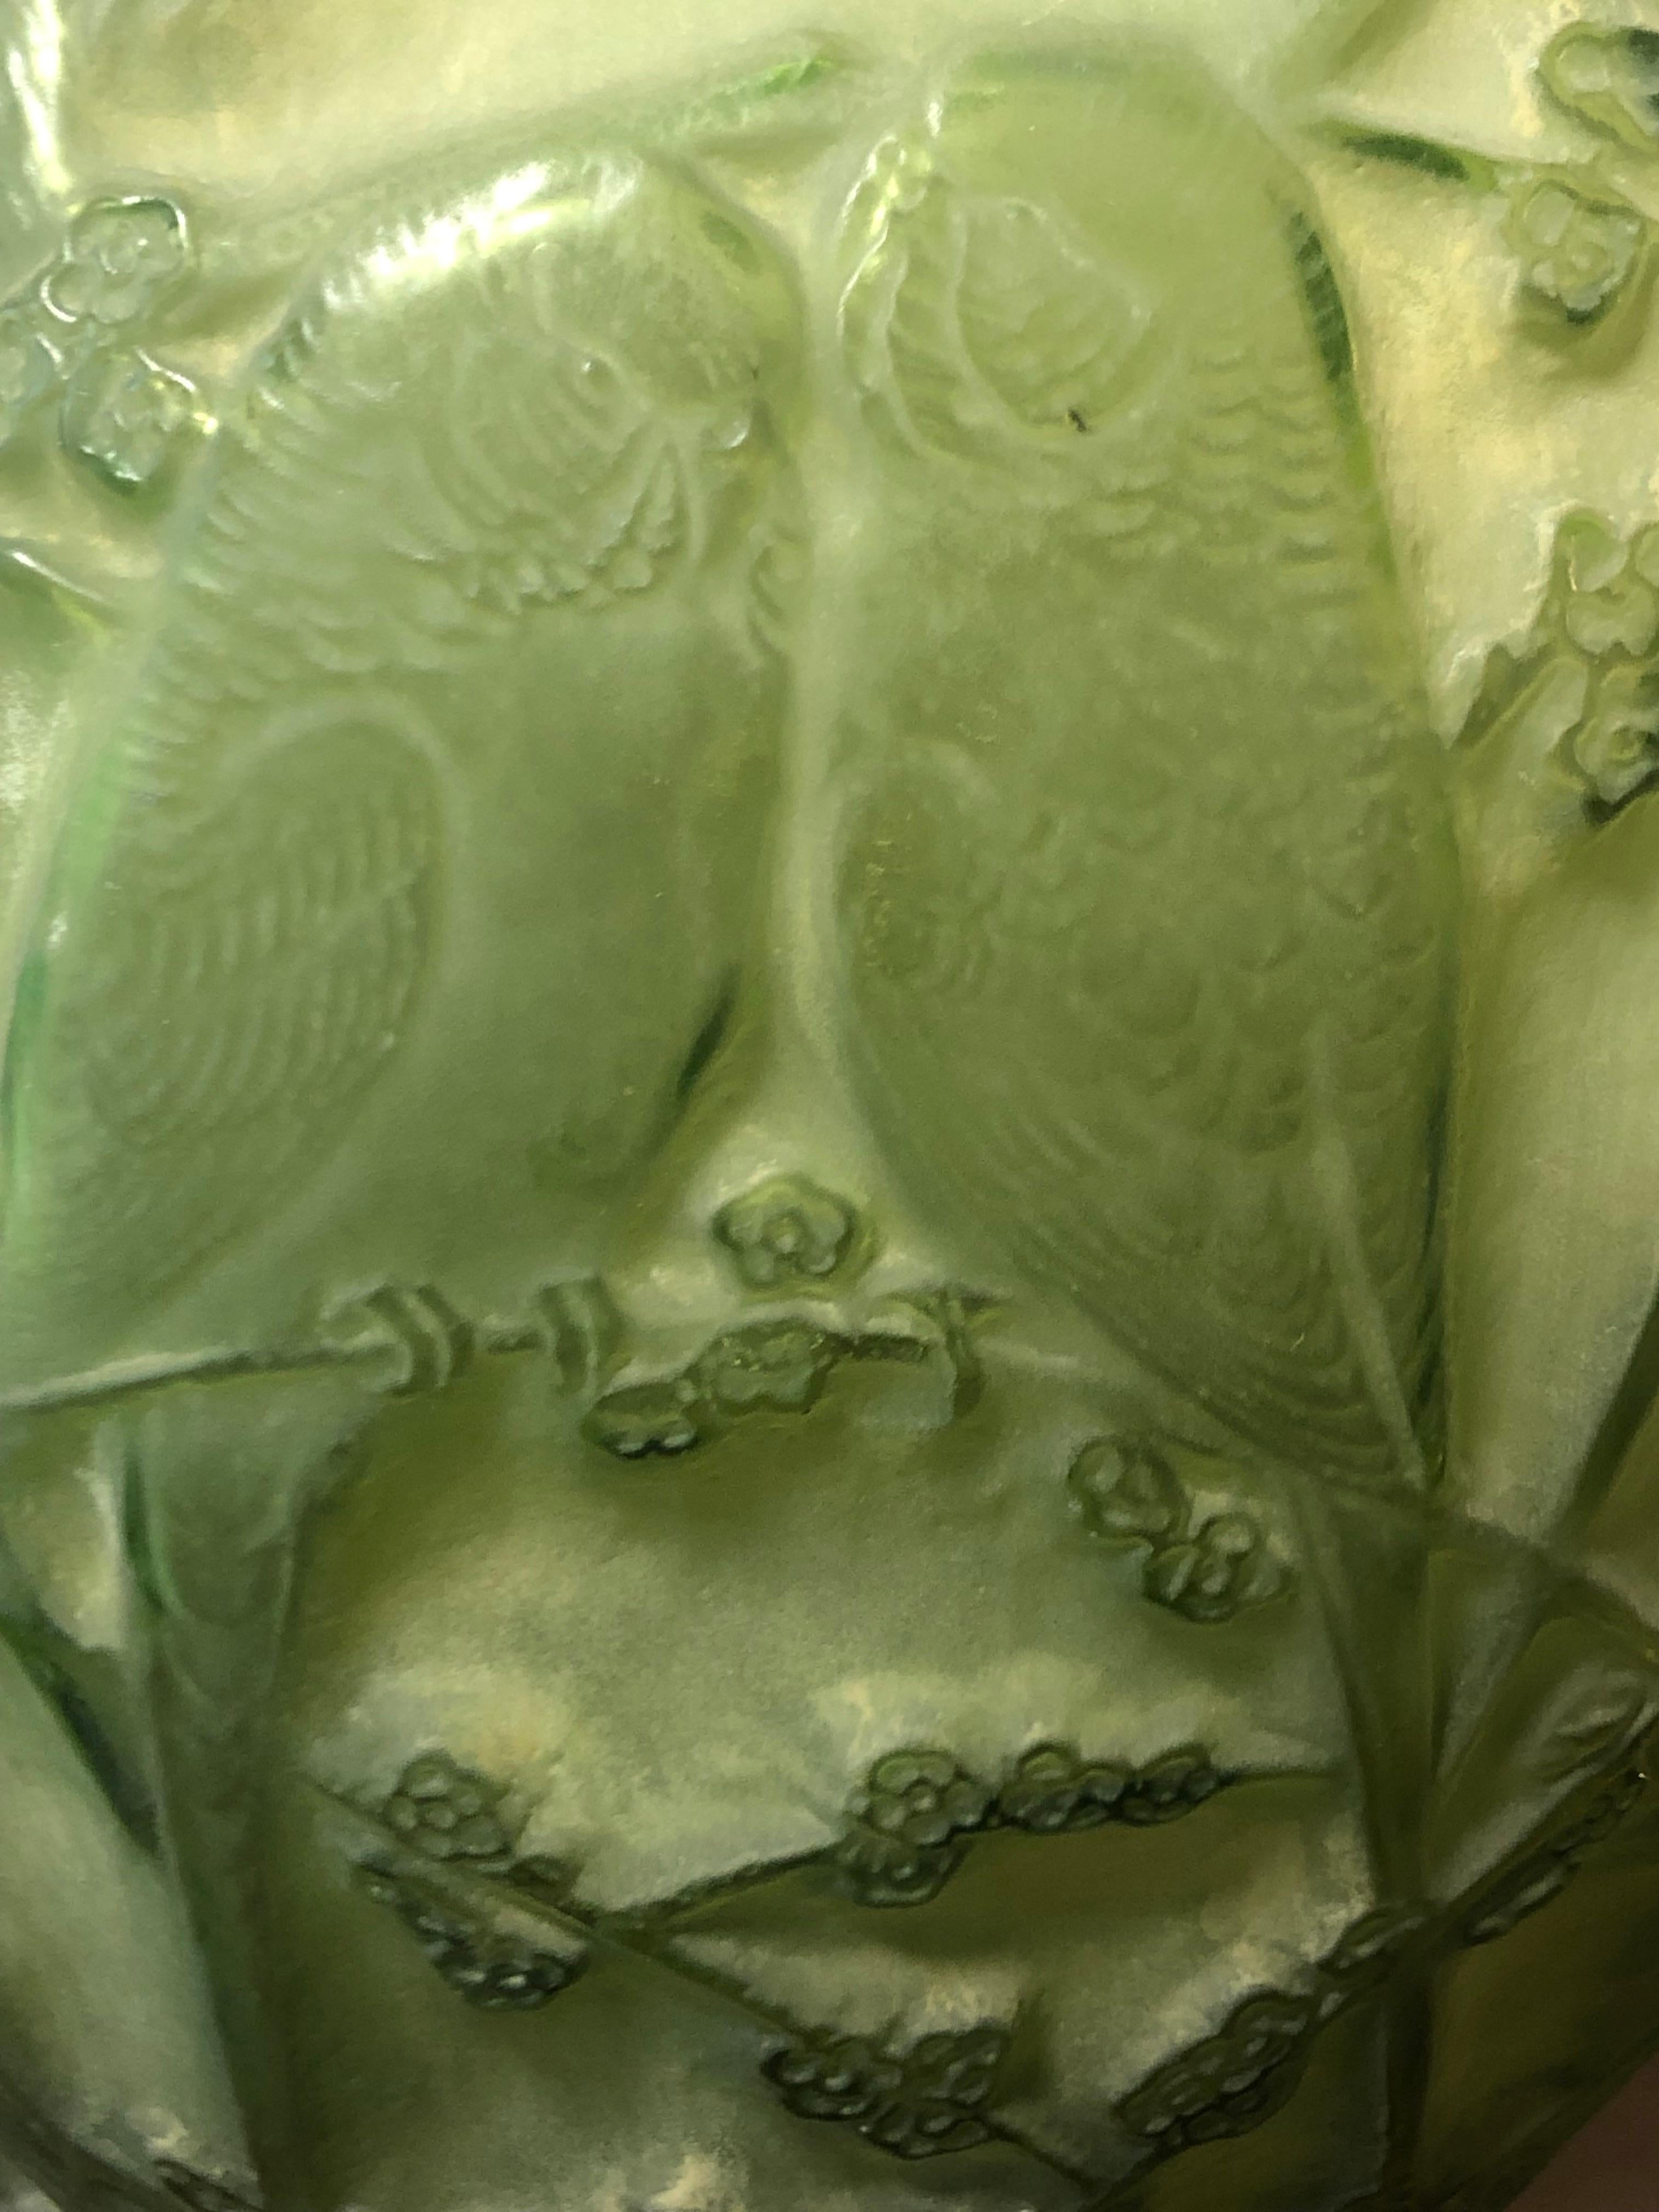 French 1919 Rene Lalique Perruches Vase Staines Lime Green Glass, Parrots